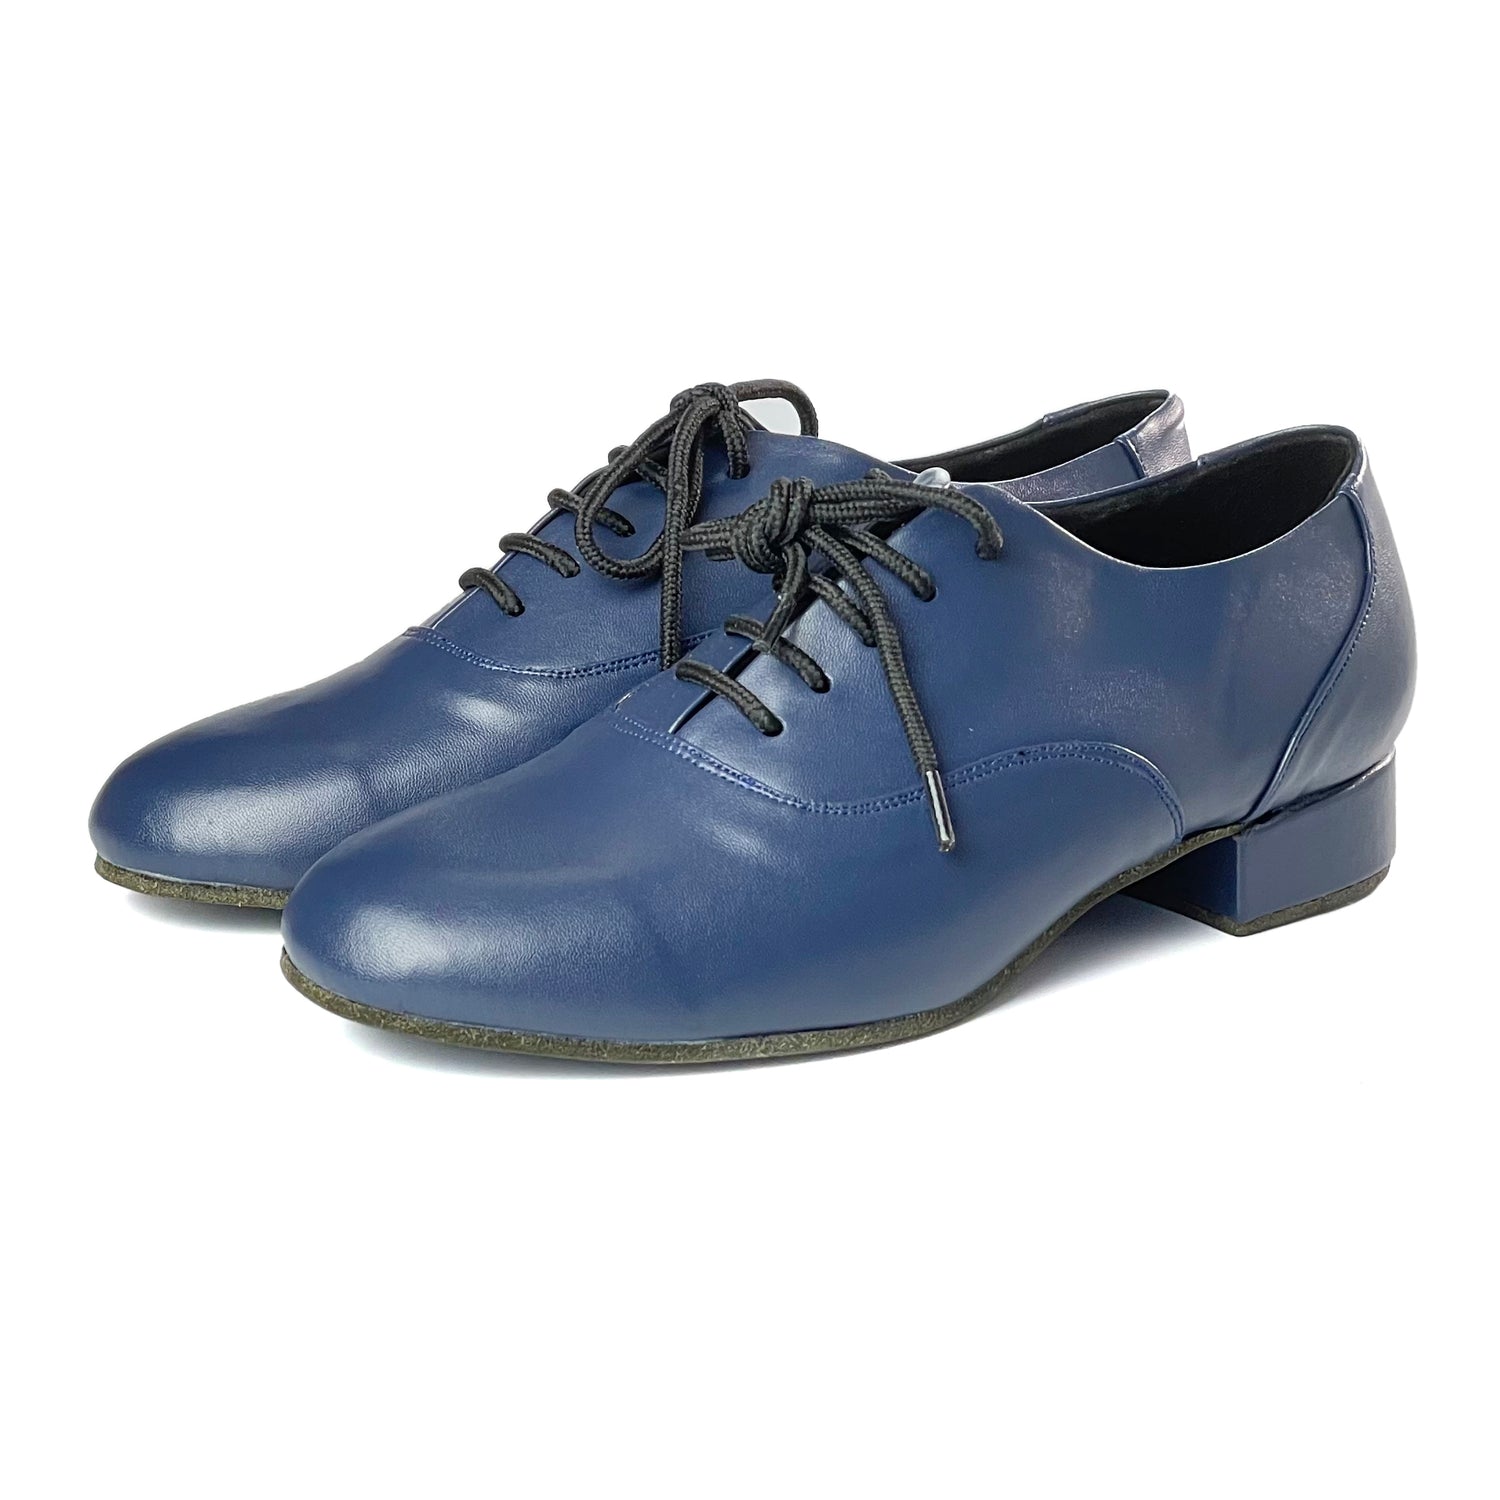 Pro Dancer Men's Blue Leather Tango Shoes with 1 Inch Heel PD-1004C2